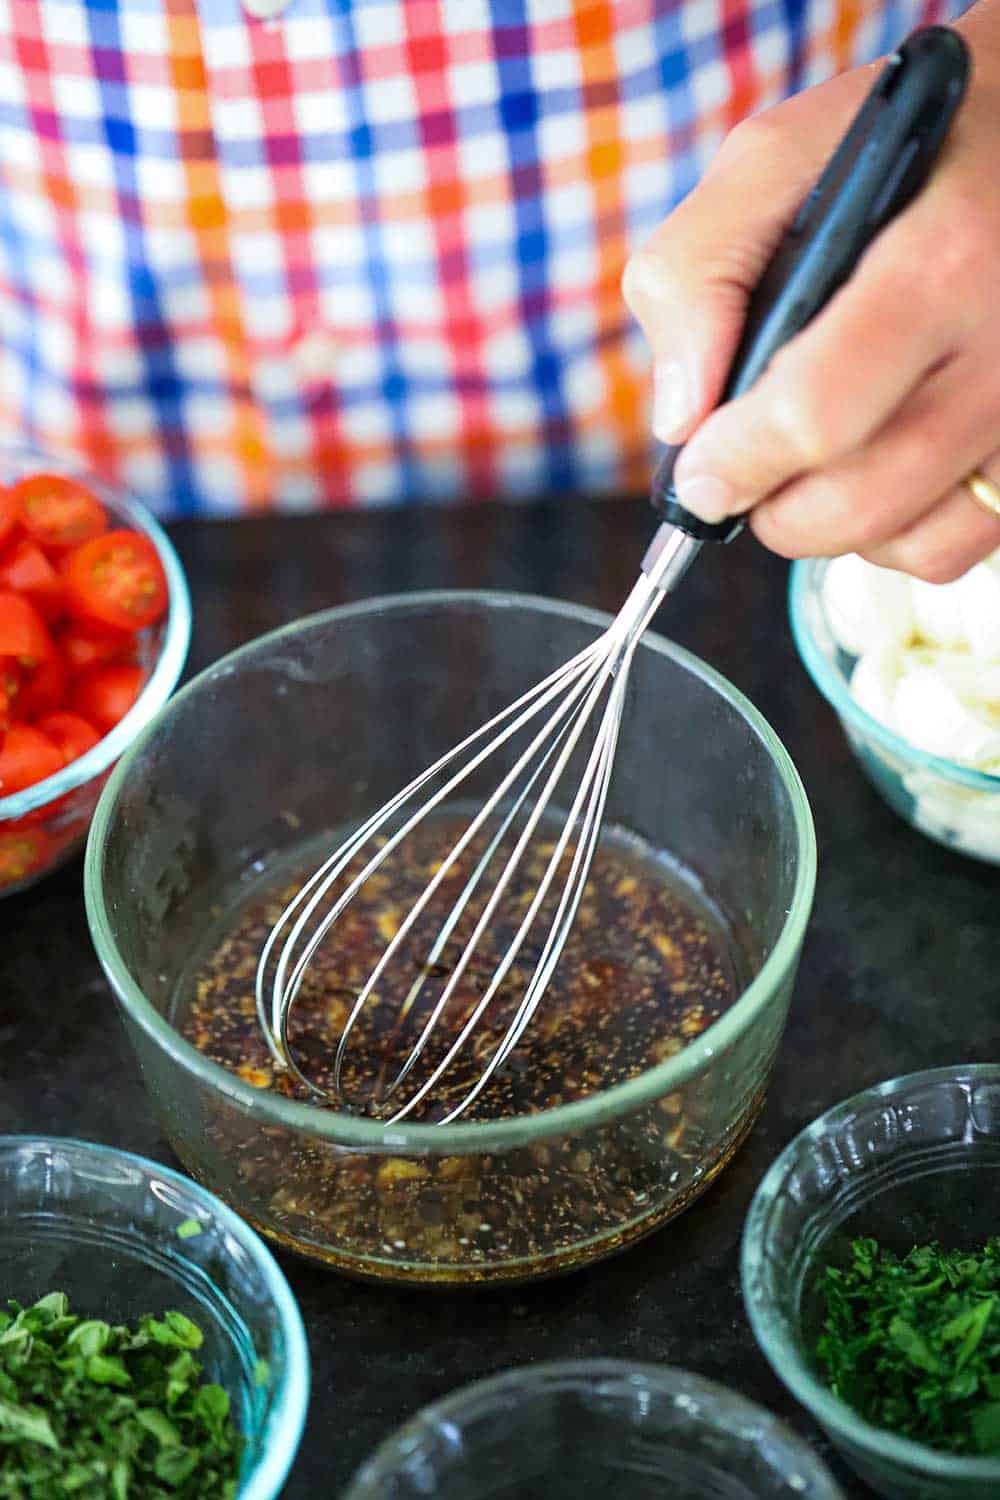 A hand using a whisk to combine a marinade in a glass bowl next to small glass bowls of herbs, mozzarella, and tomatoes.